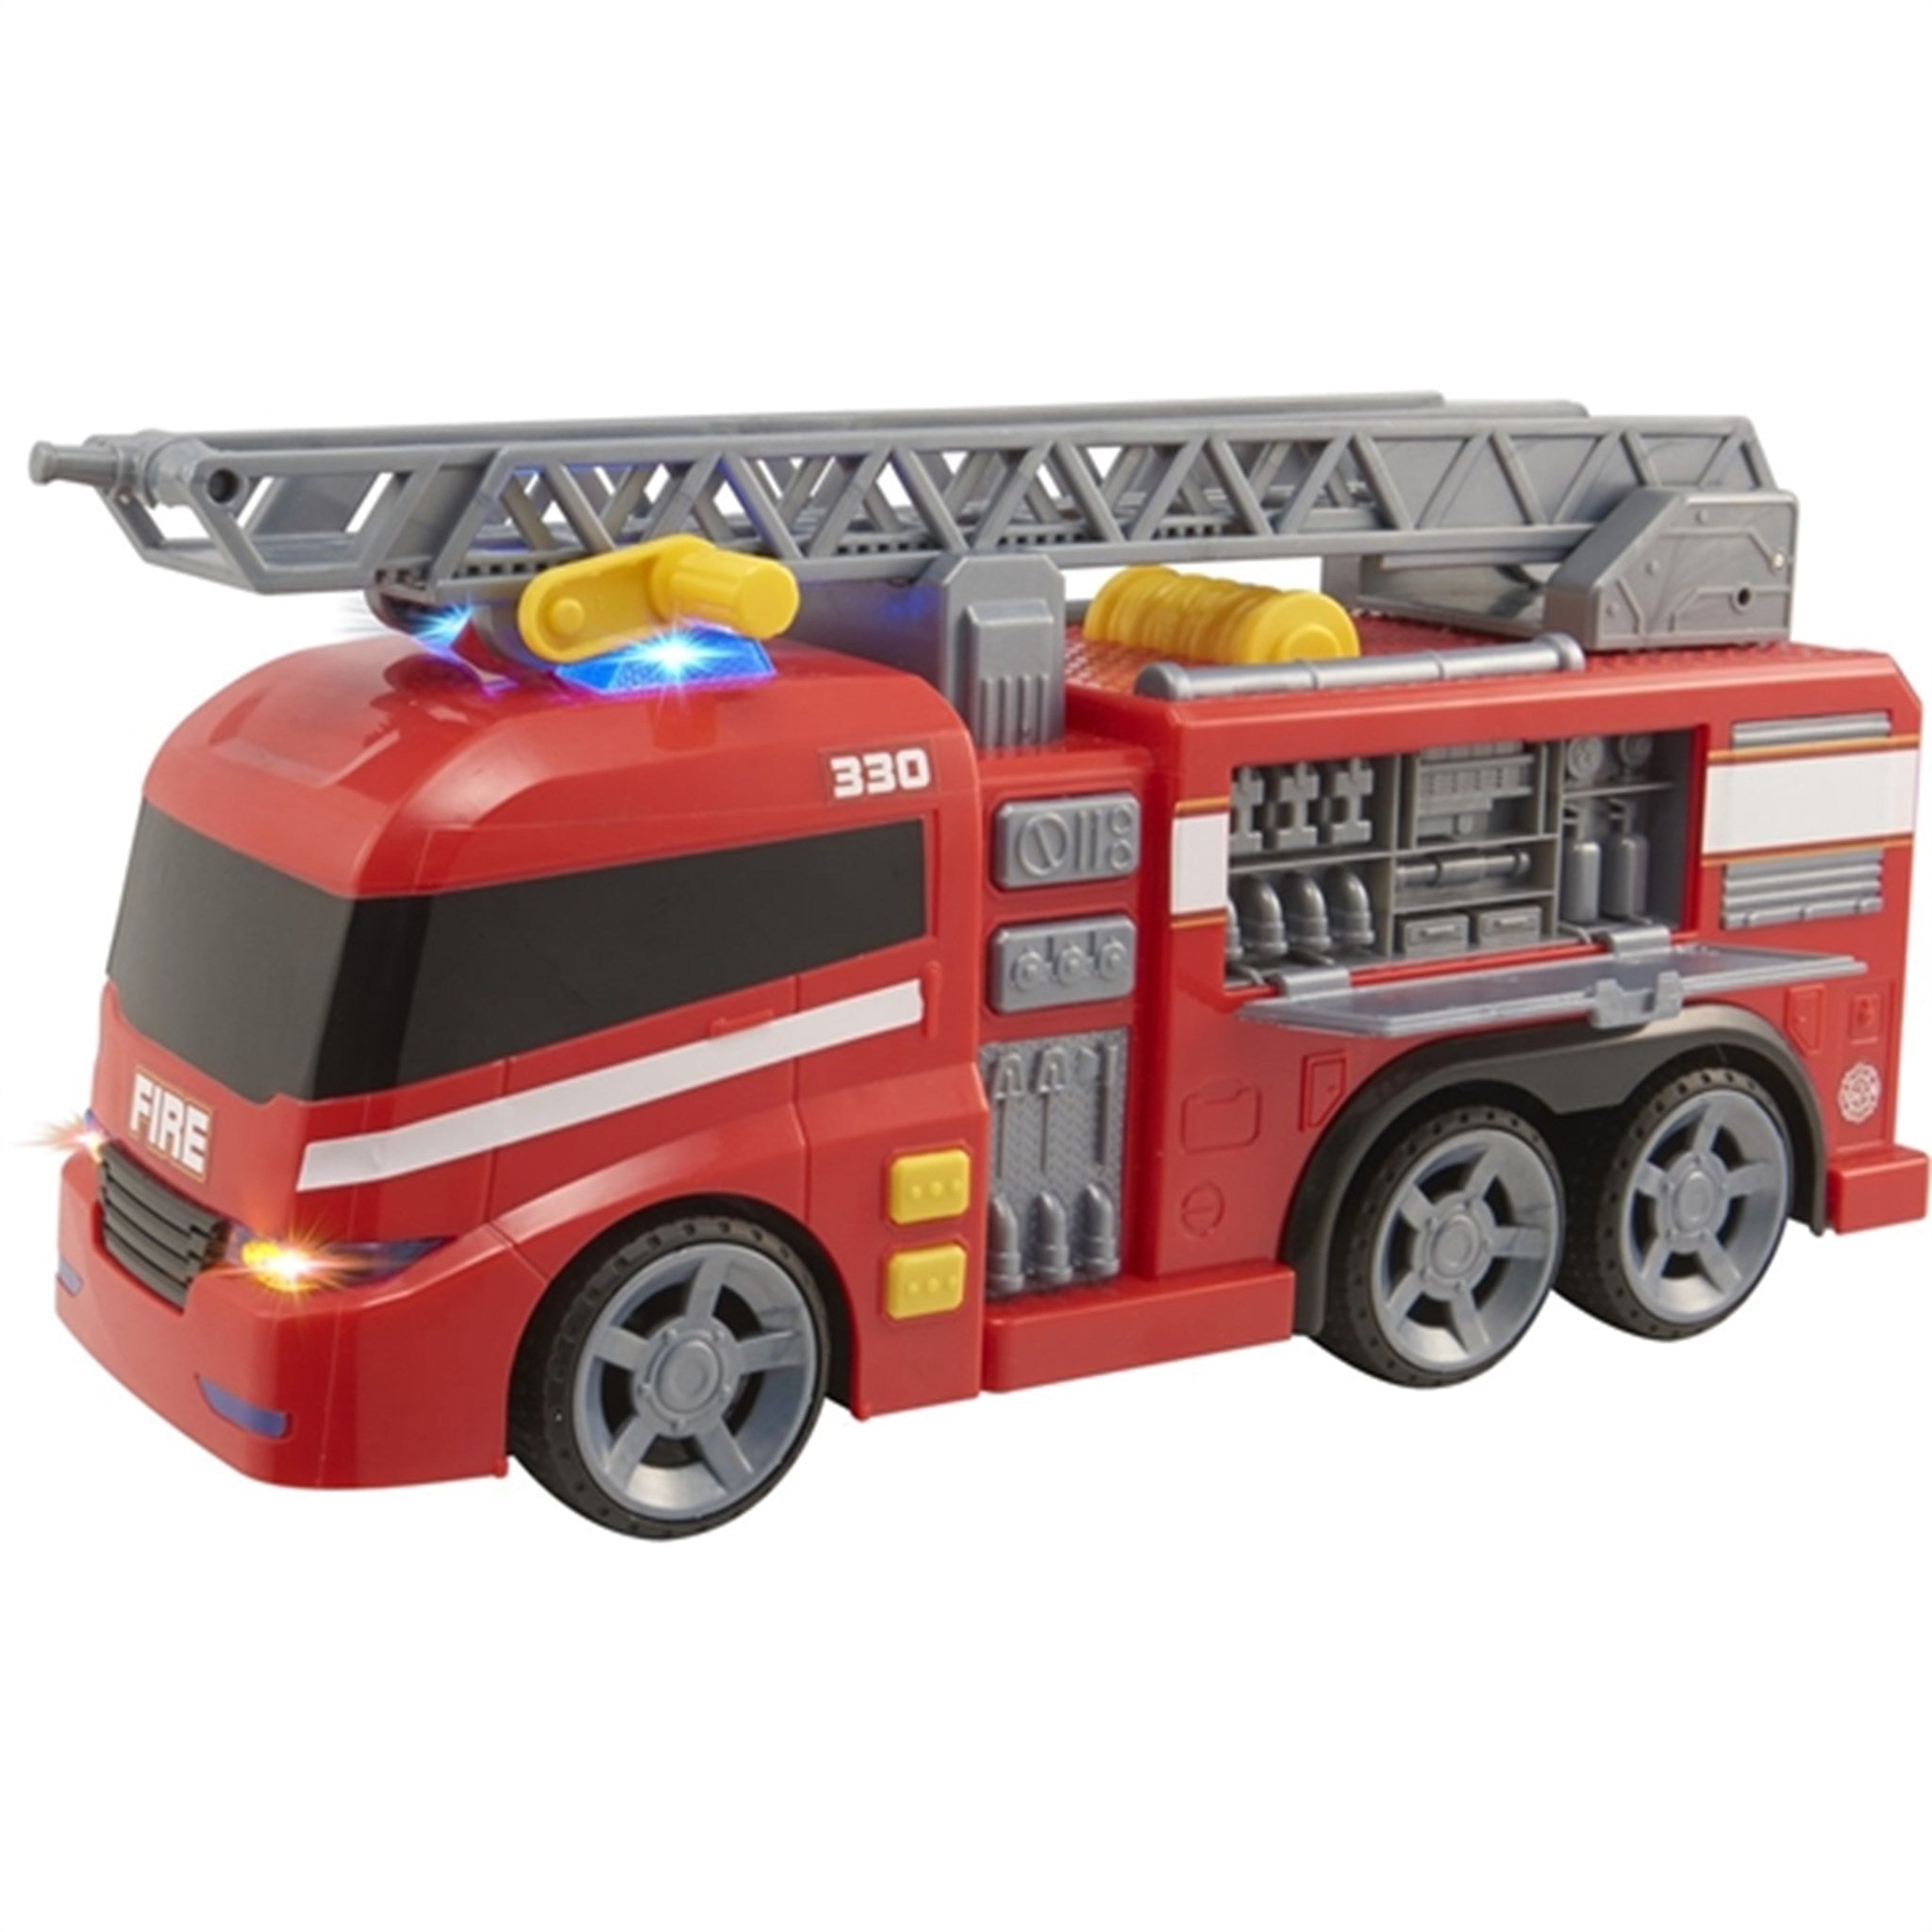 Teamsterz Large L&S Fire Engine